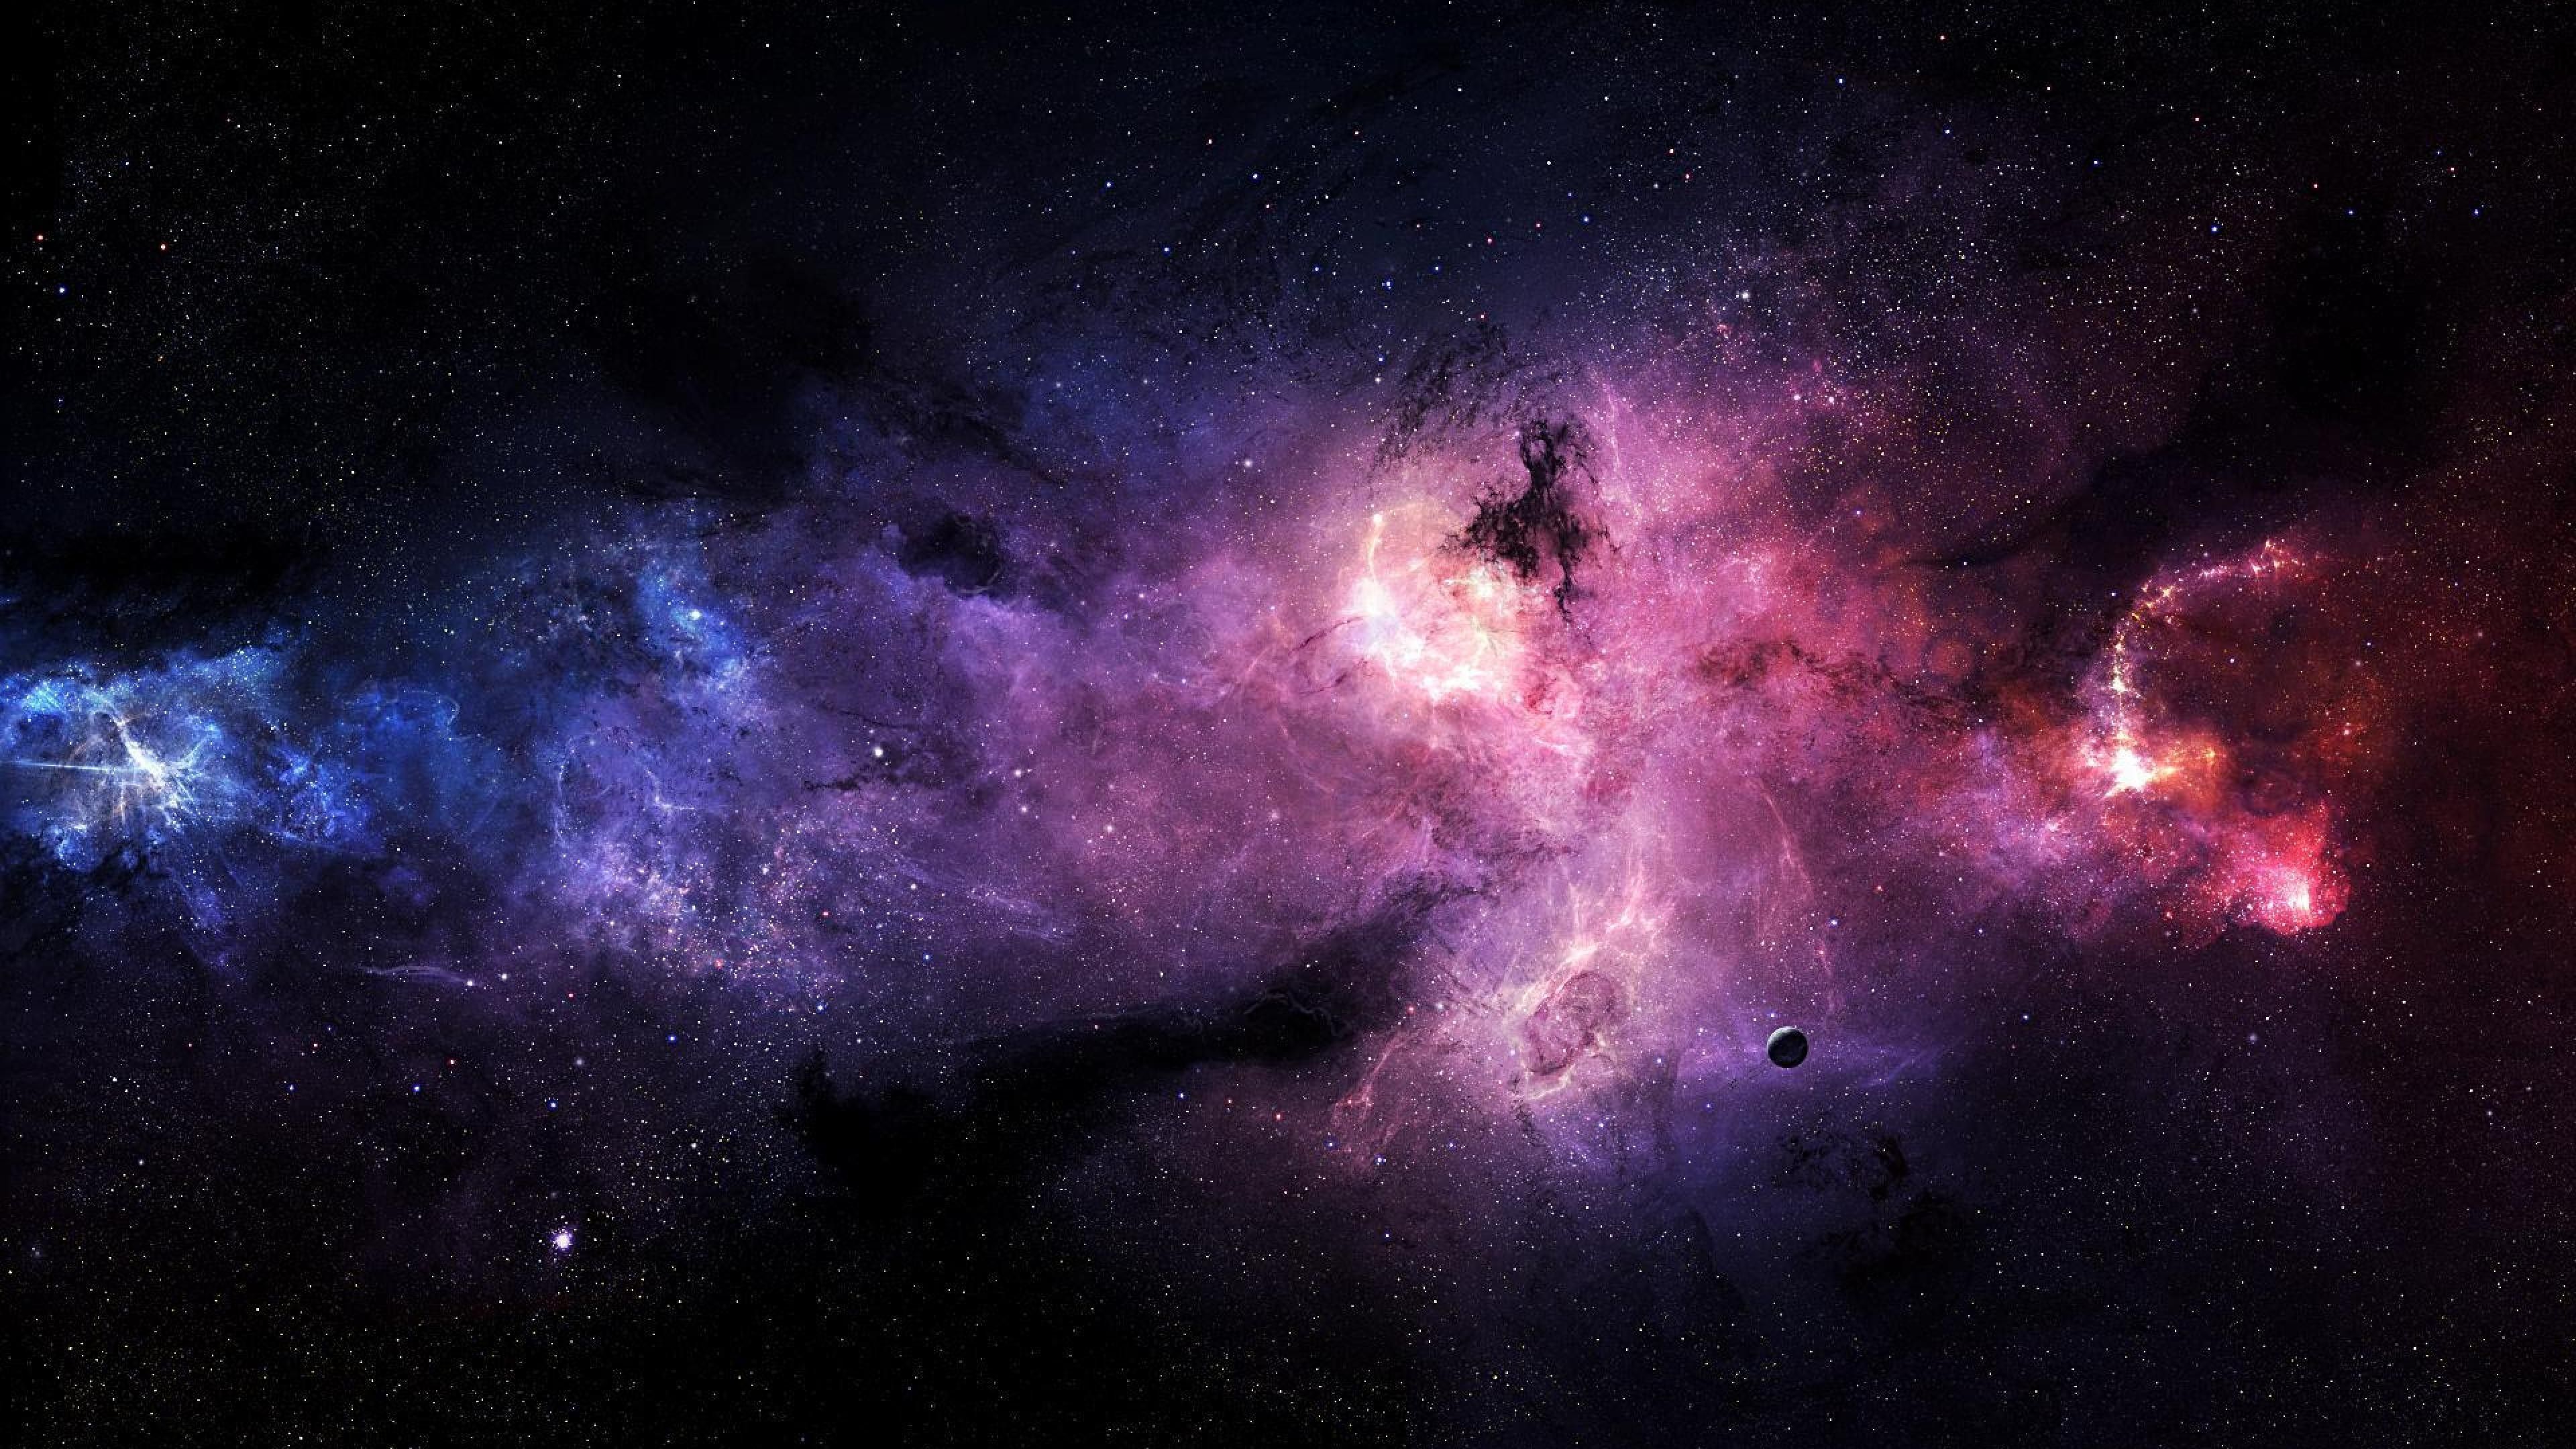 4K wallpaper SpaceDownload free awesome High Resolution